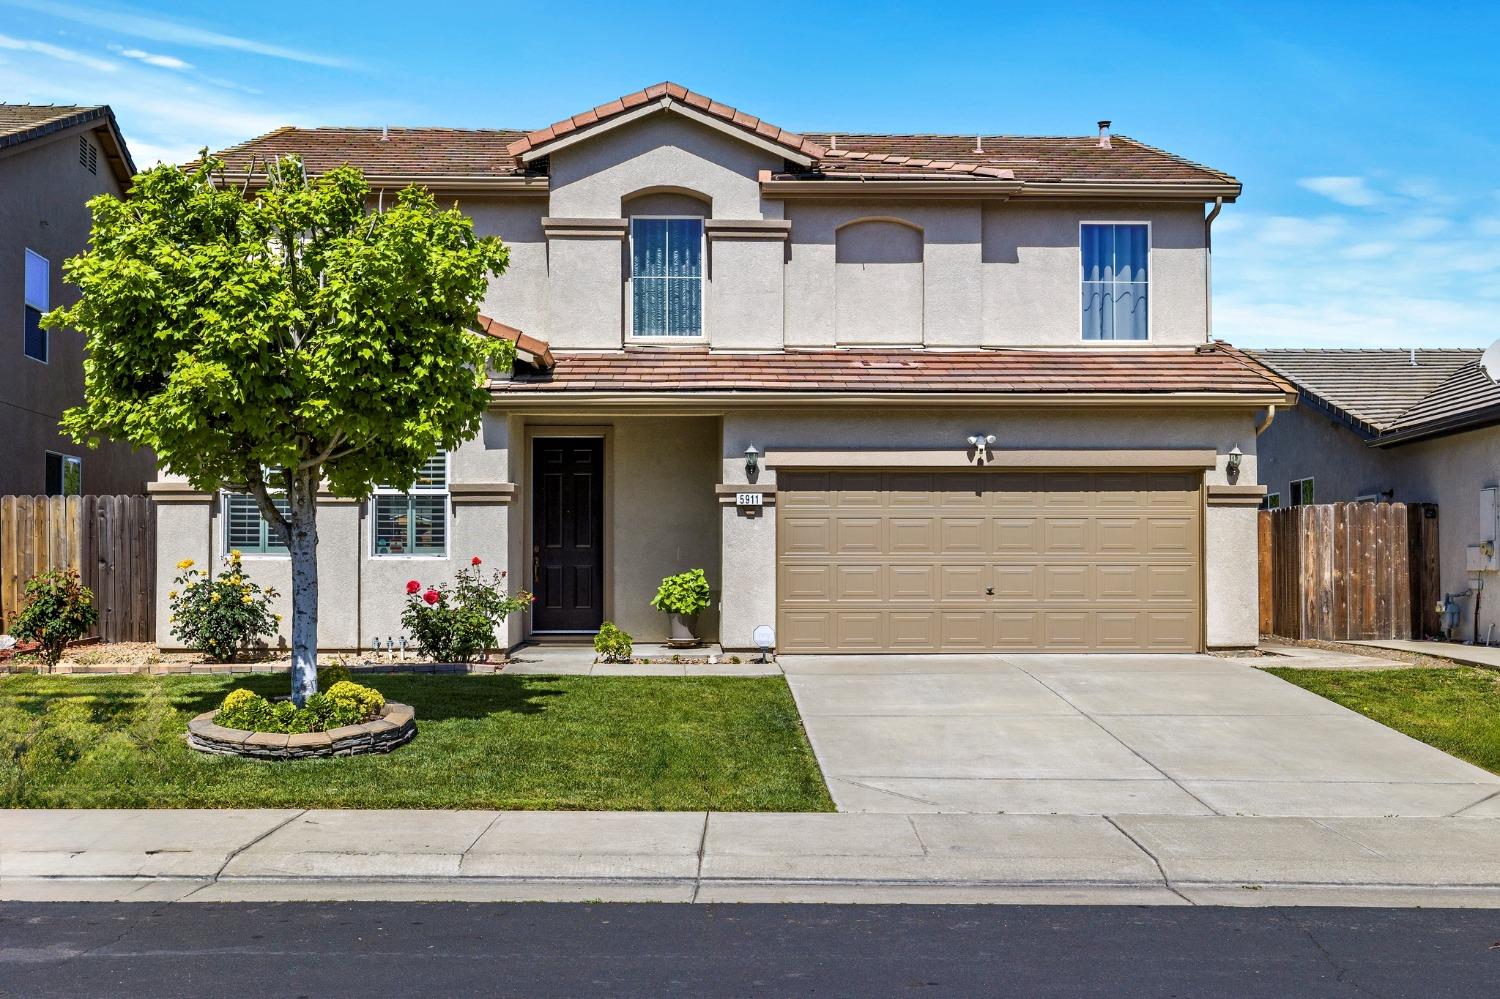 Photo of 5911 Dresden Wy in Stockton, CA